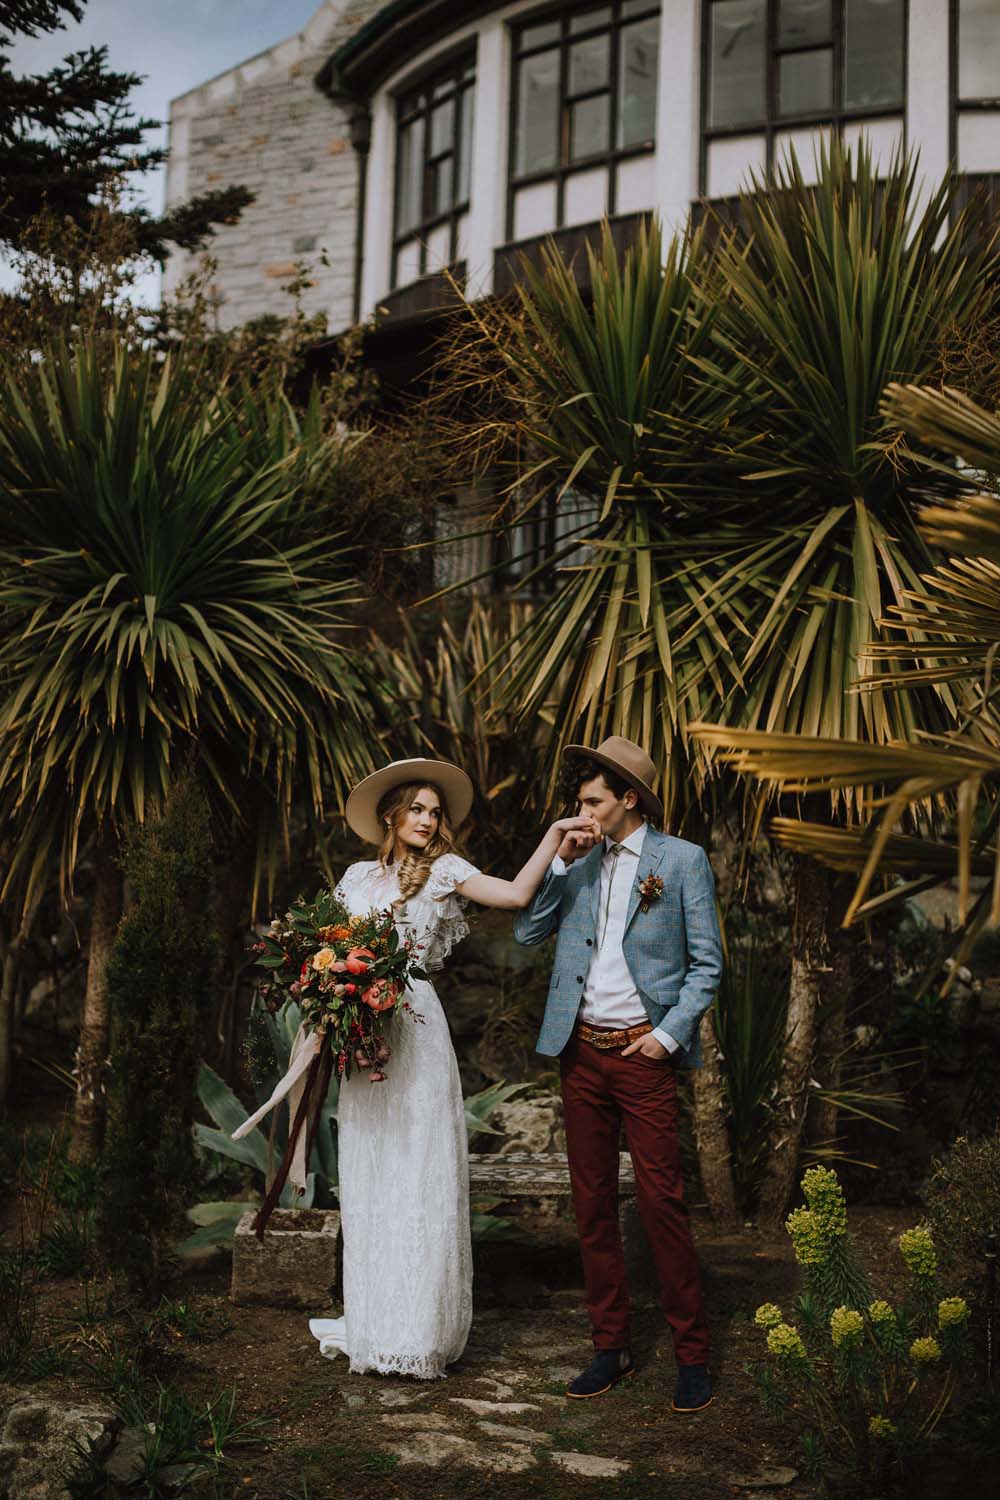 These Are The Details You Need For A Southwestern-Inspired Wedding - bride and groom